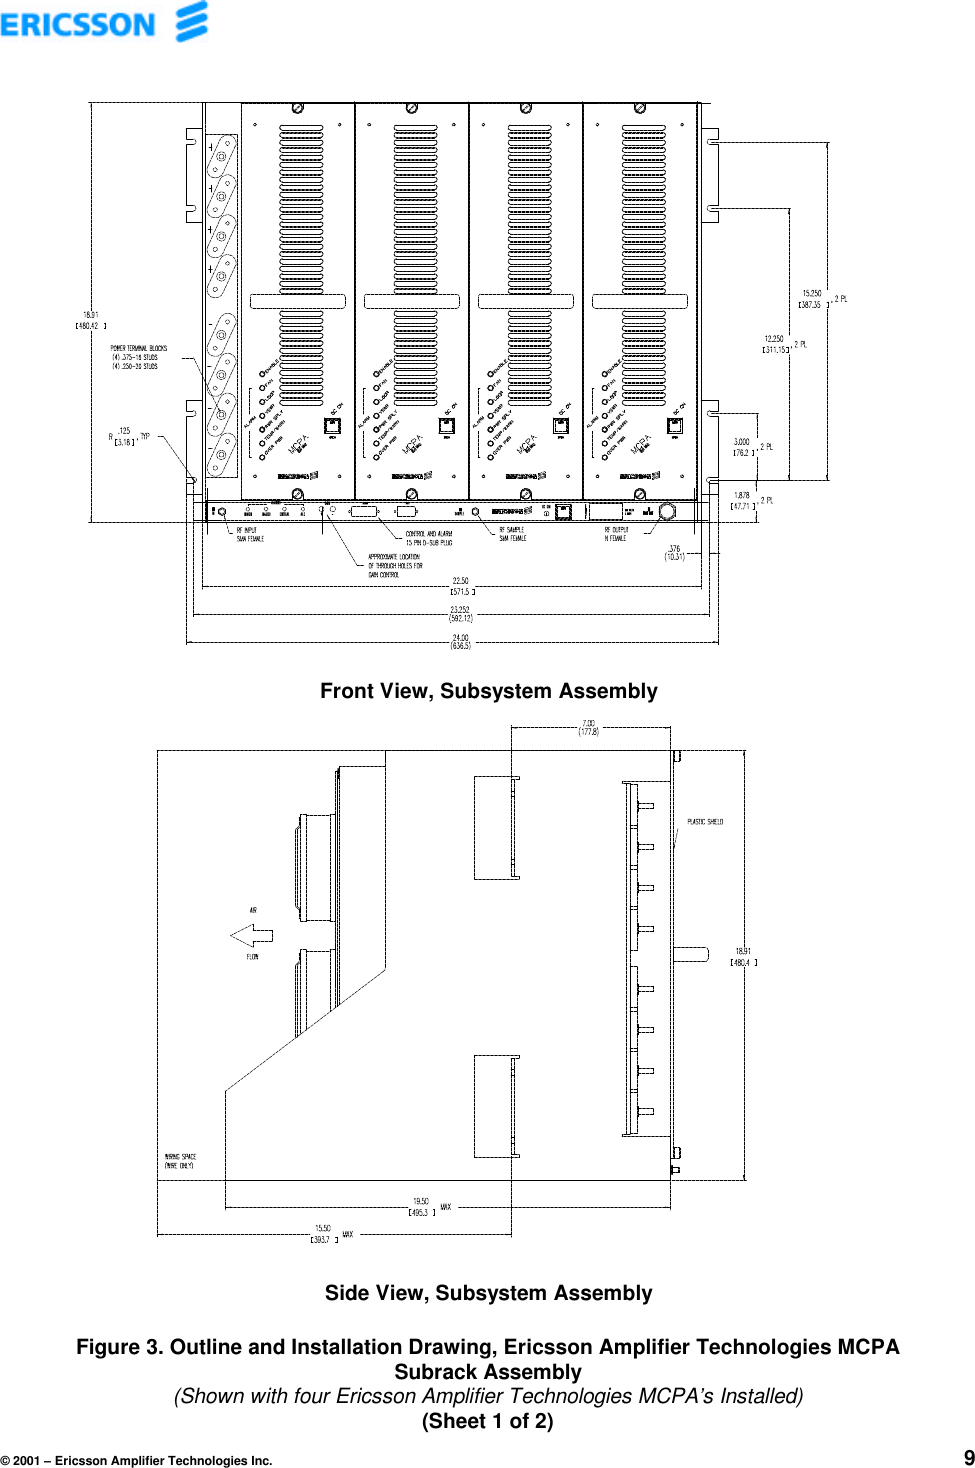 © 2001 – Ericsson Amplifier Technologies Inc. 9Front View, Subsystem Assembly                          Side View, Subsystem AssemblyFigure 3. Outline and Installation Drawing, Ericsson Amplifier Technologies MCPASubrack Assembly(Shown with four Ericsson Amplifier Technologies MCPA’s Installed)(Sheet 1 of 2)